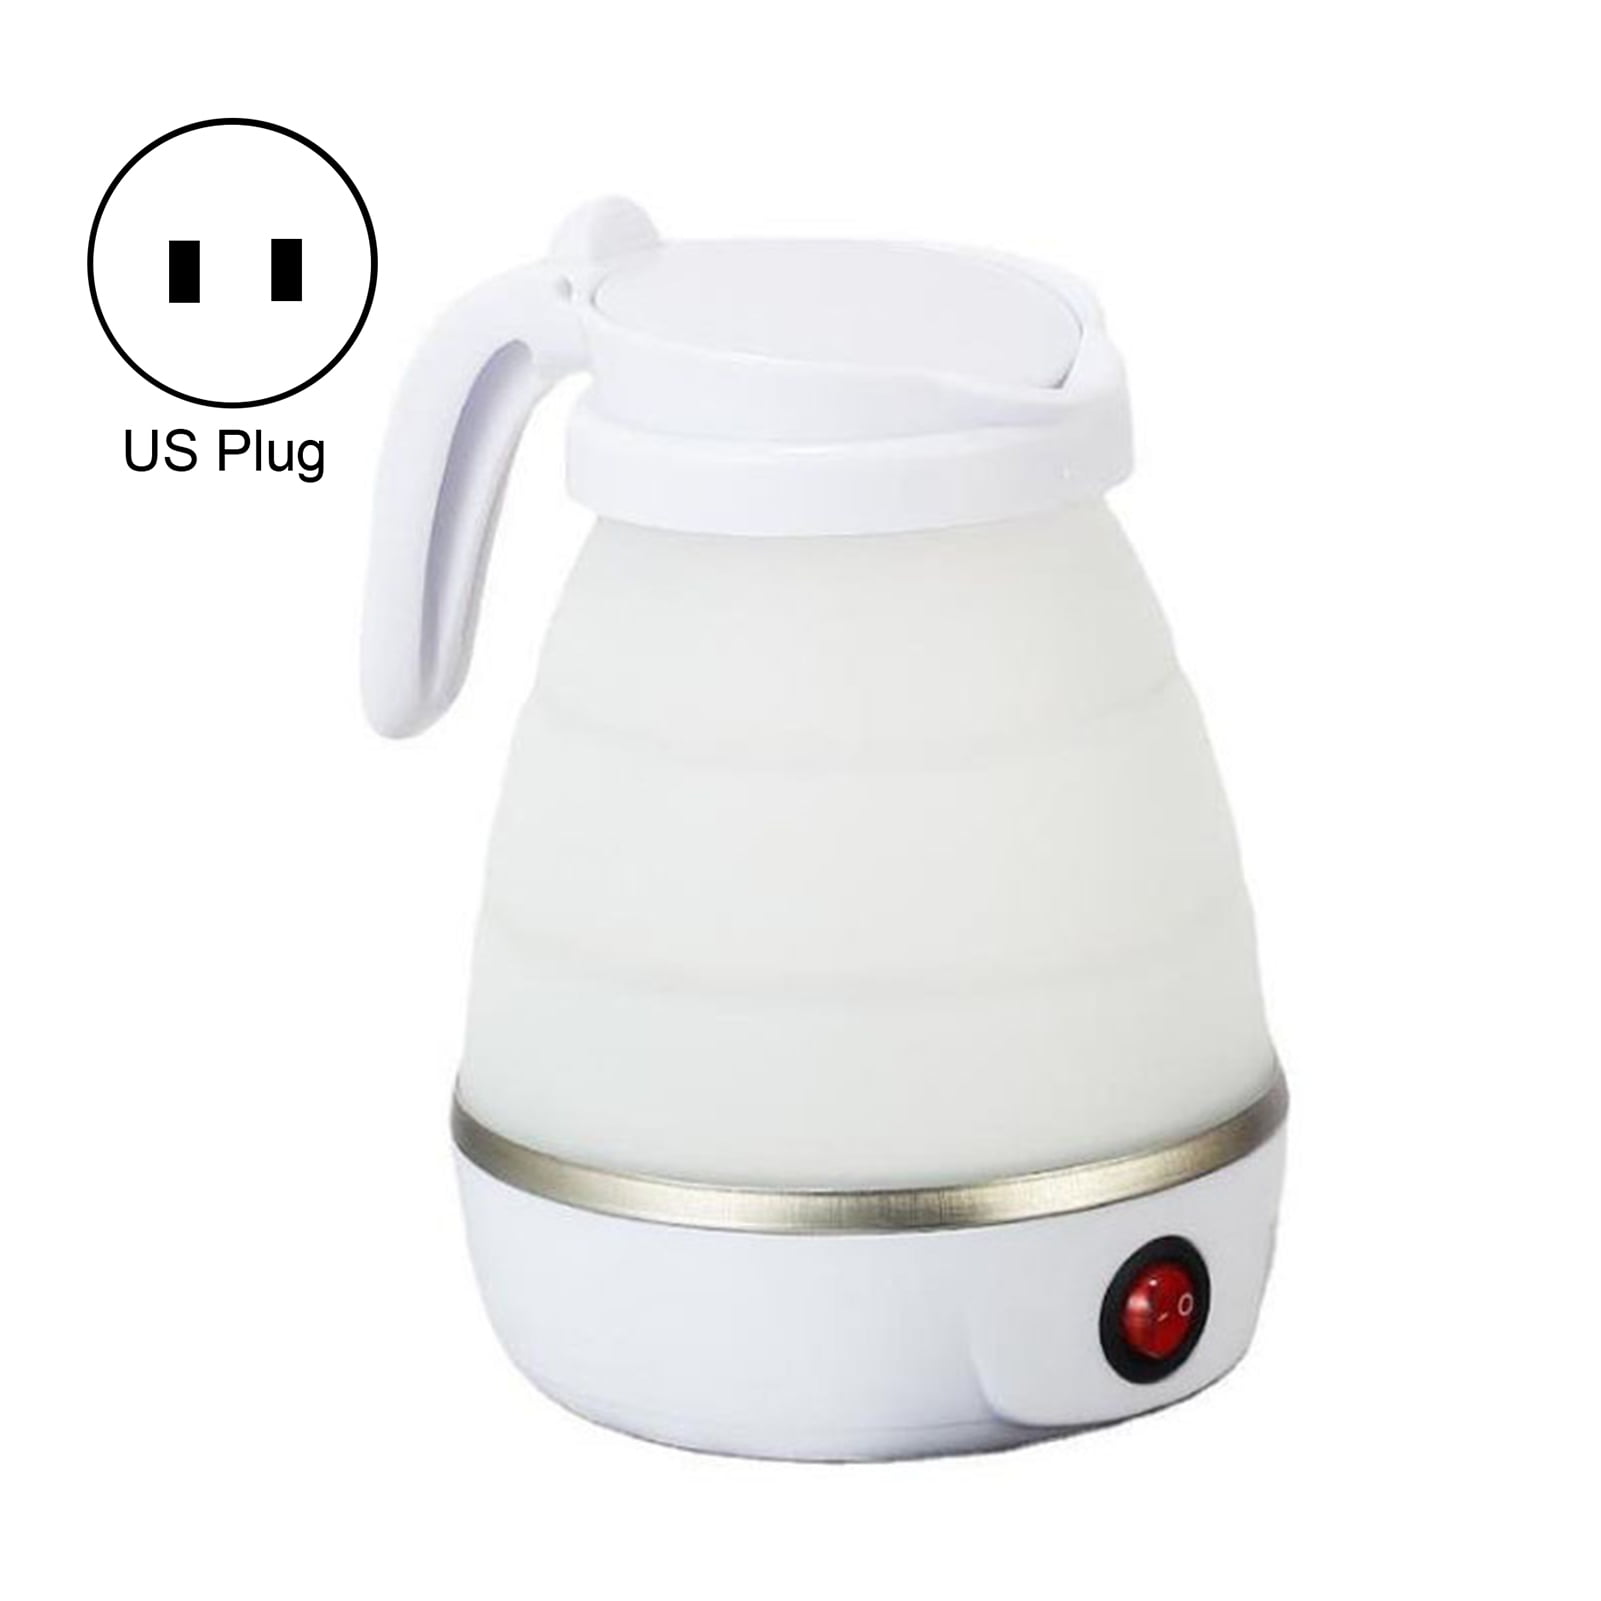 1L Travel Portable Foldable Electric Kettle Collapsible Water Boiler